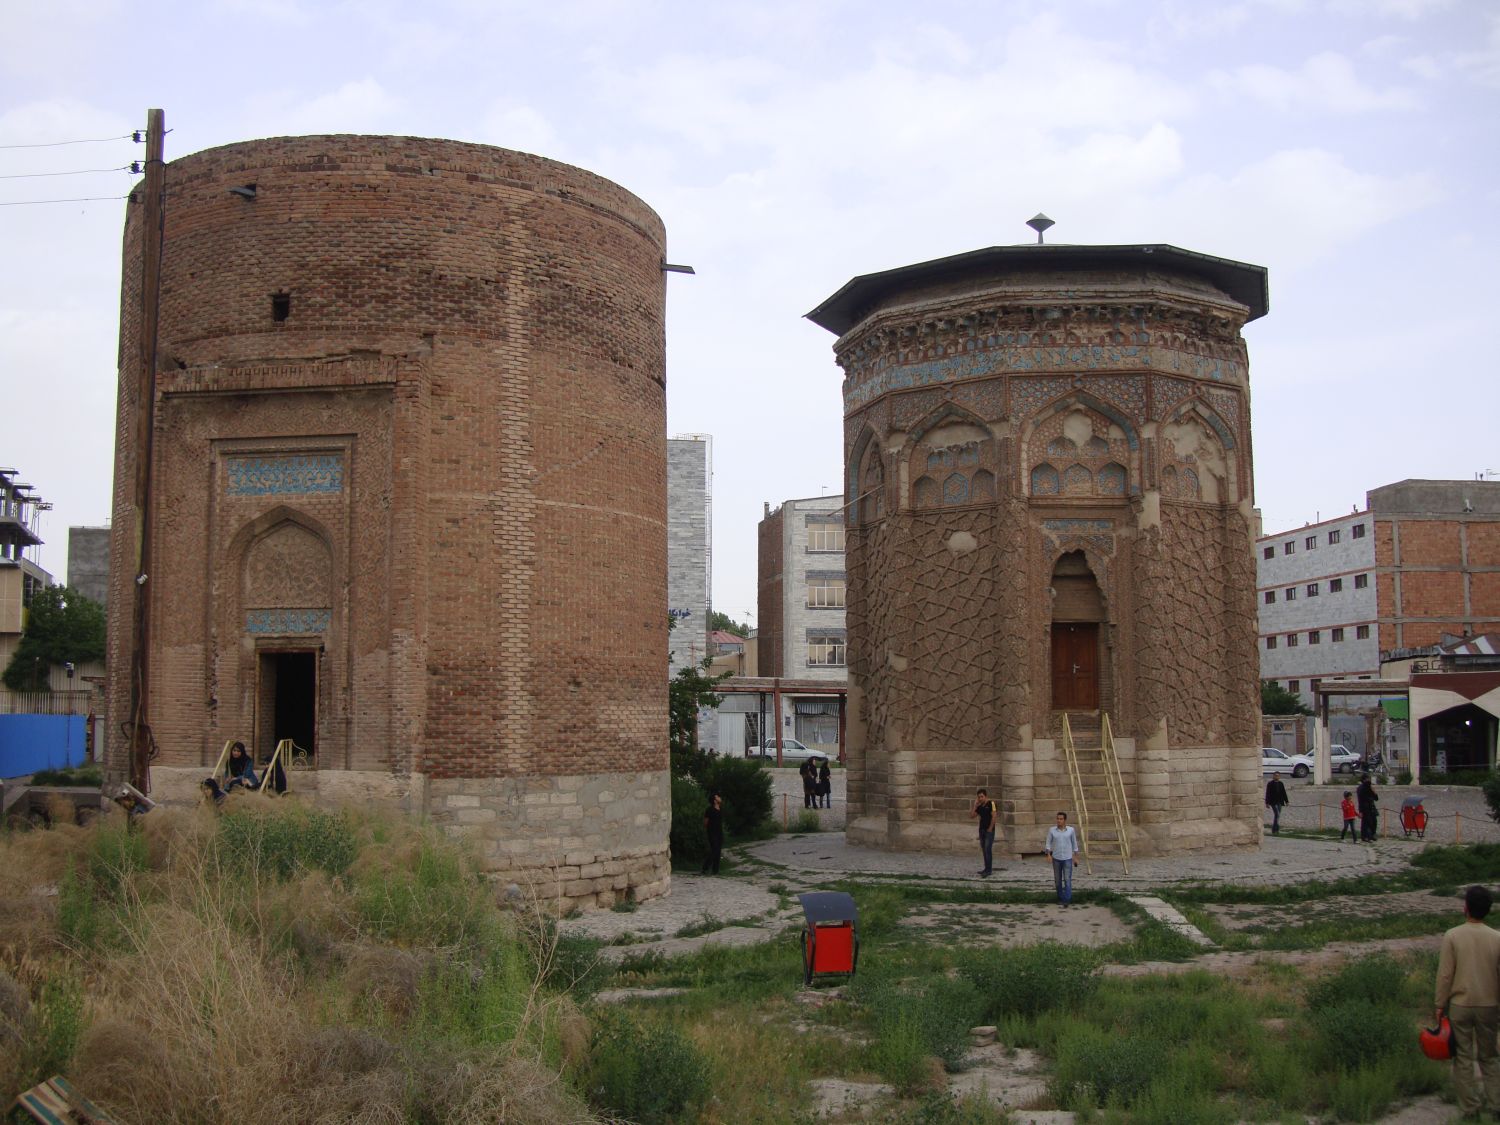 Exterior view of the entrances to the adjacent tombs, with surrounding buildings visible